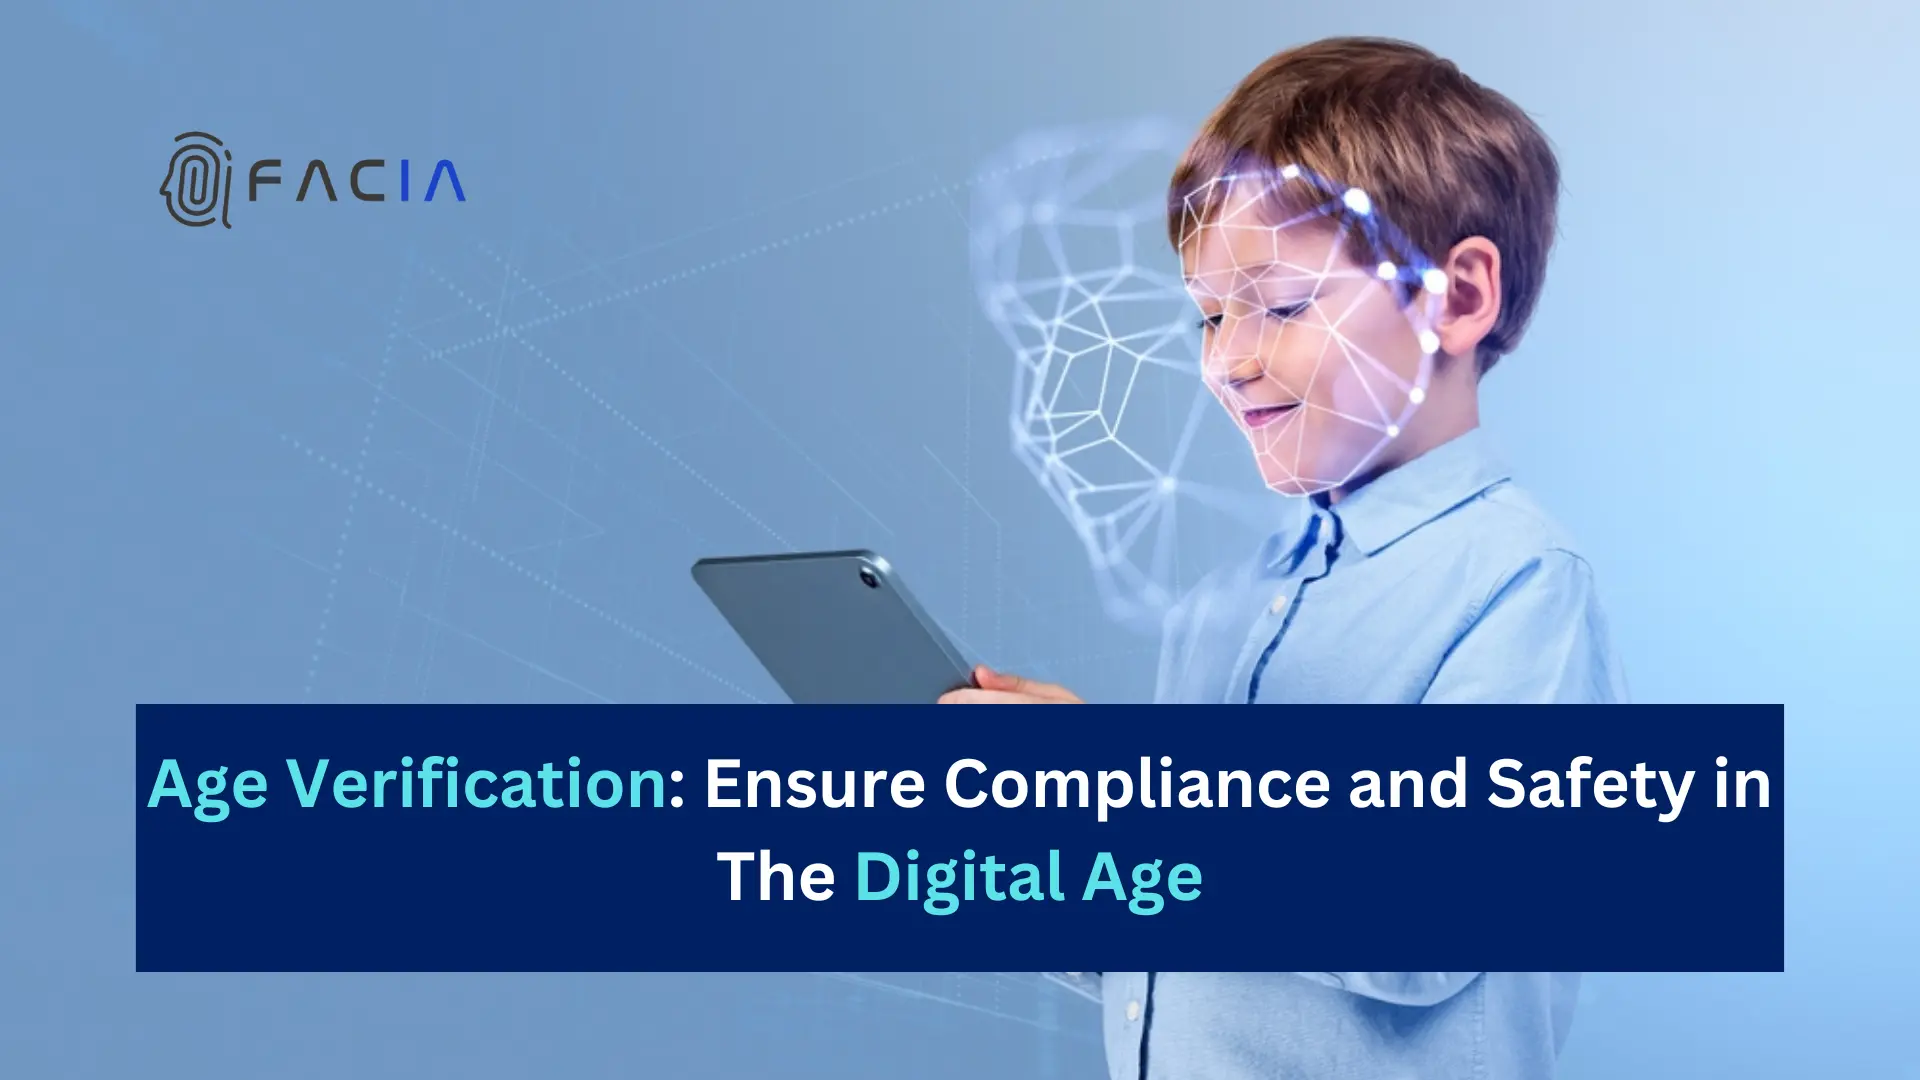 Age Verification System Compliance and Safety in Digital Era